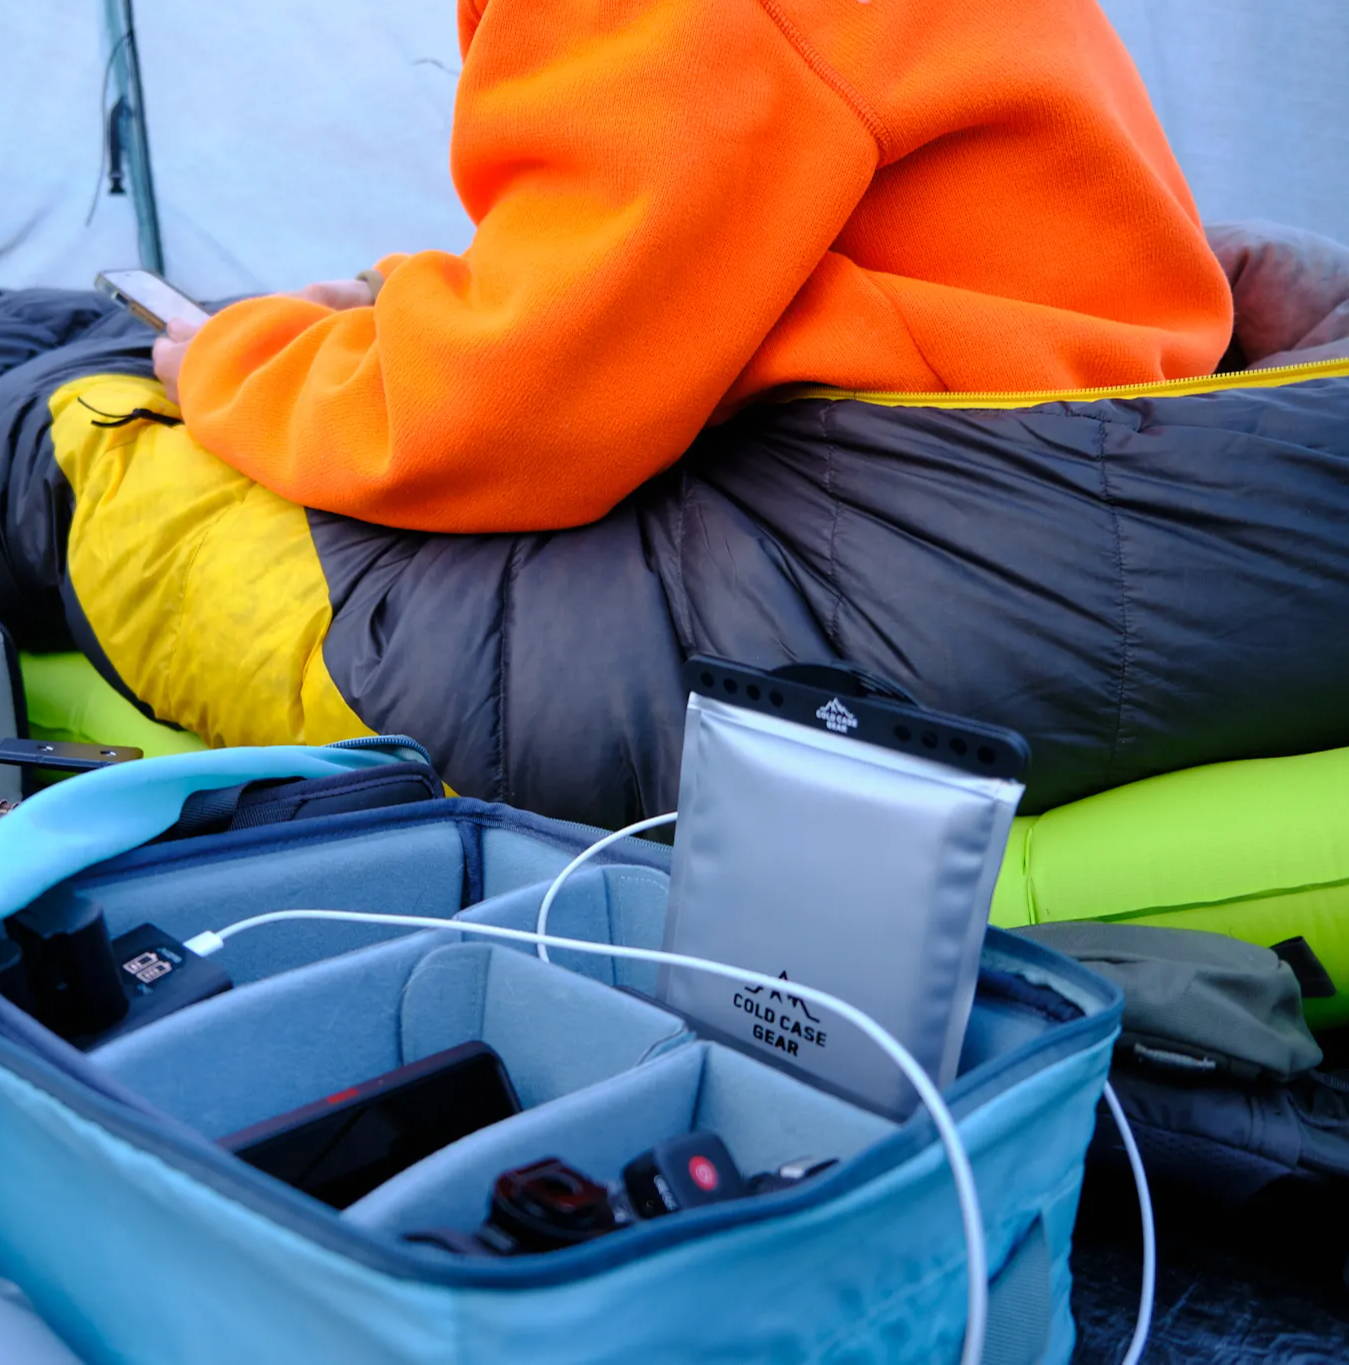 There are lots of options to consider when it comes to choosing a sleeping bag.